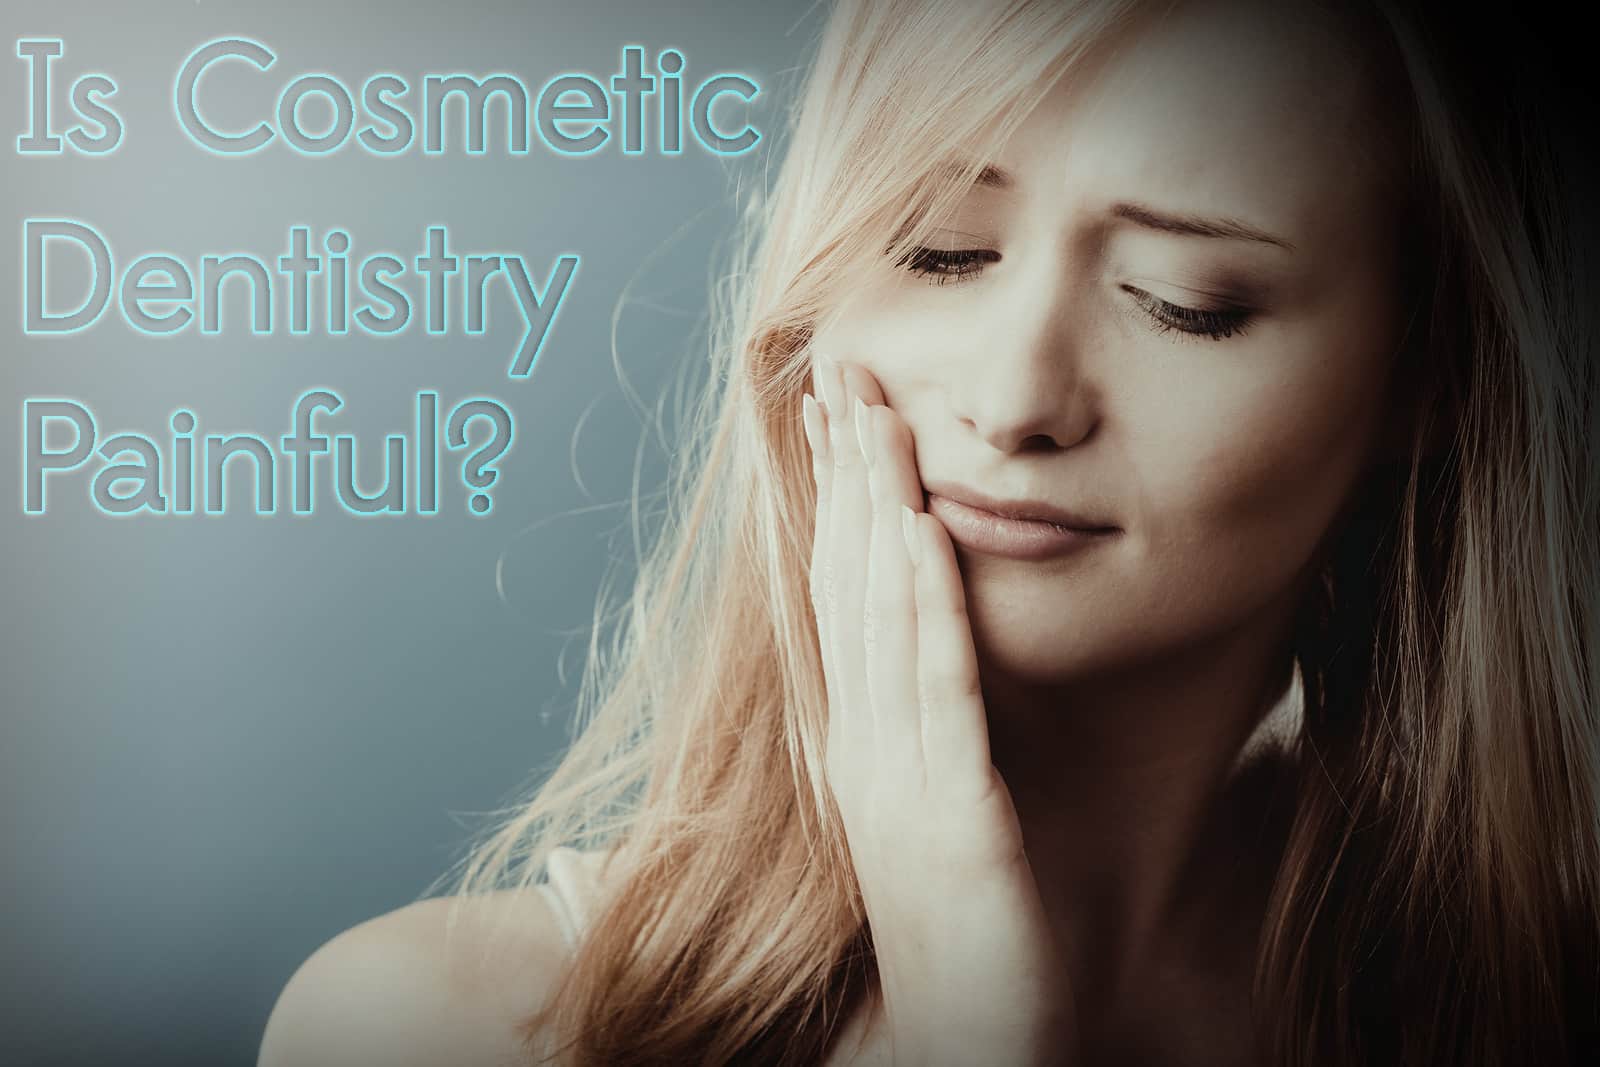 Does Cosmetic Dentistry Hurt